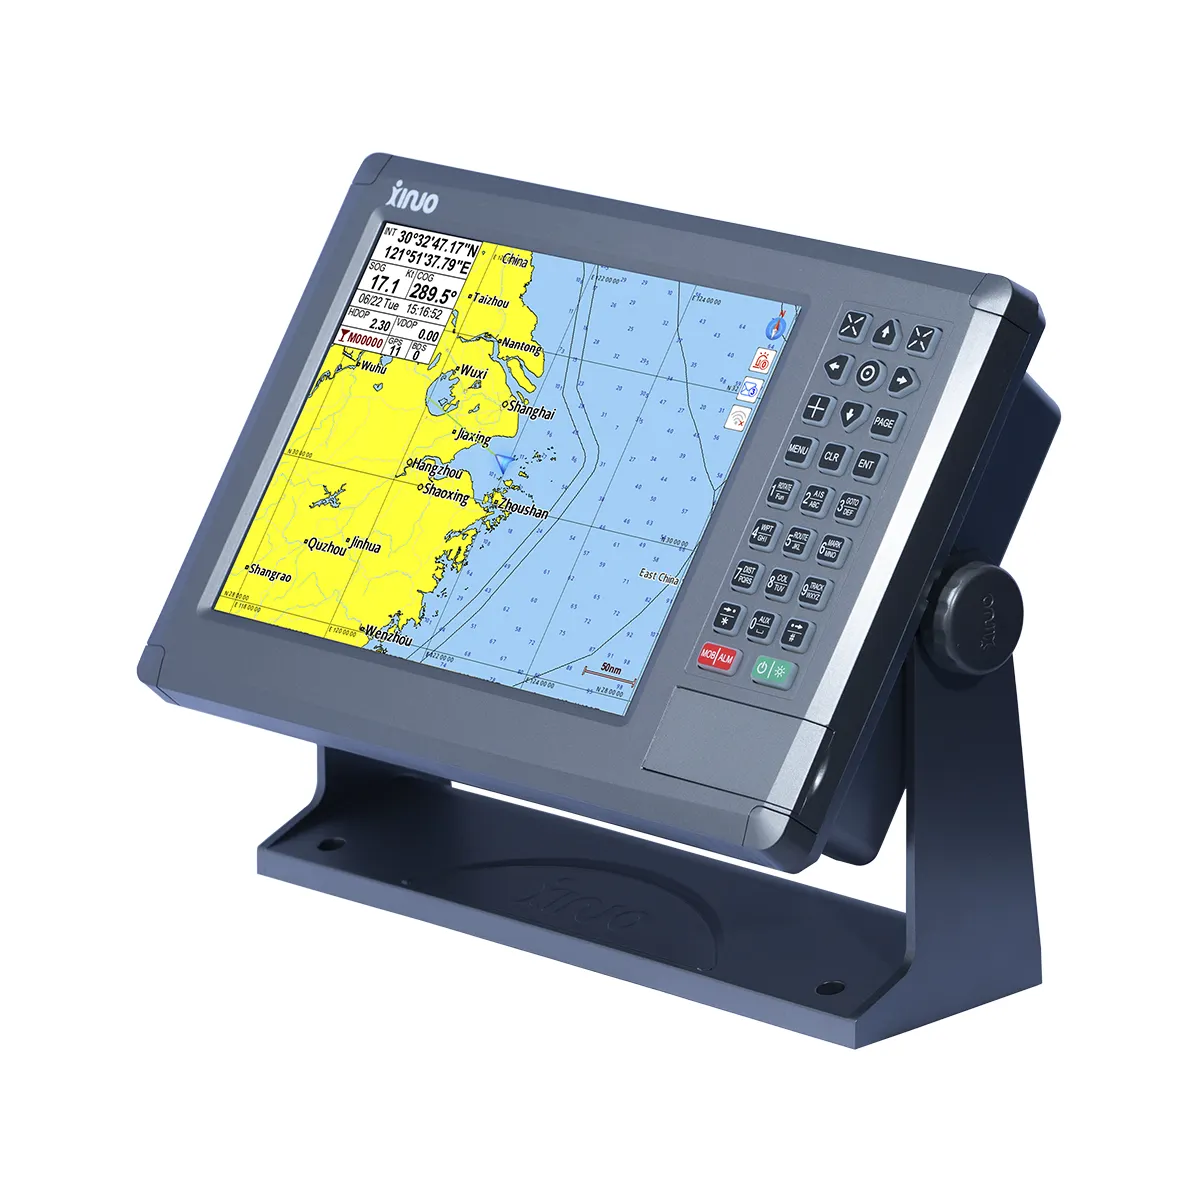 marine electronics marine GPS chart plotter XINUO GN-150 series GN-1508 8" small size TFT LCD display CE IMO NMEA0183 IP65